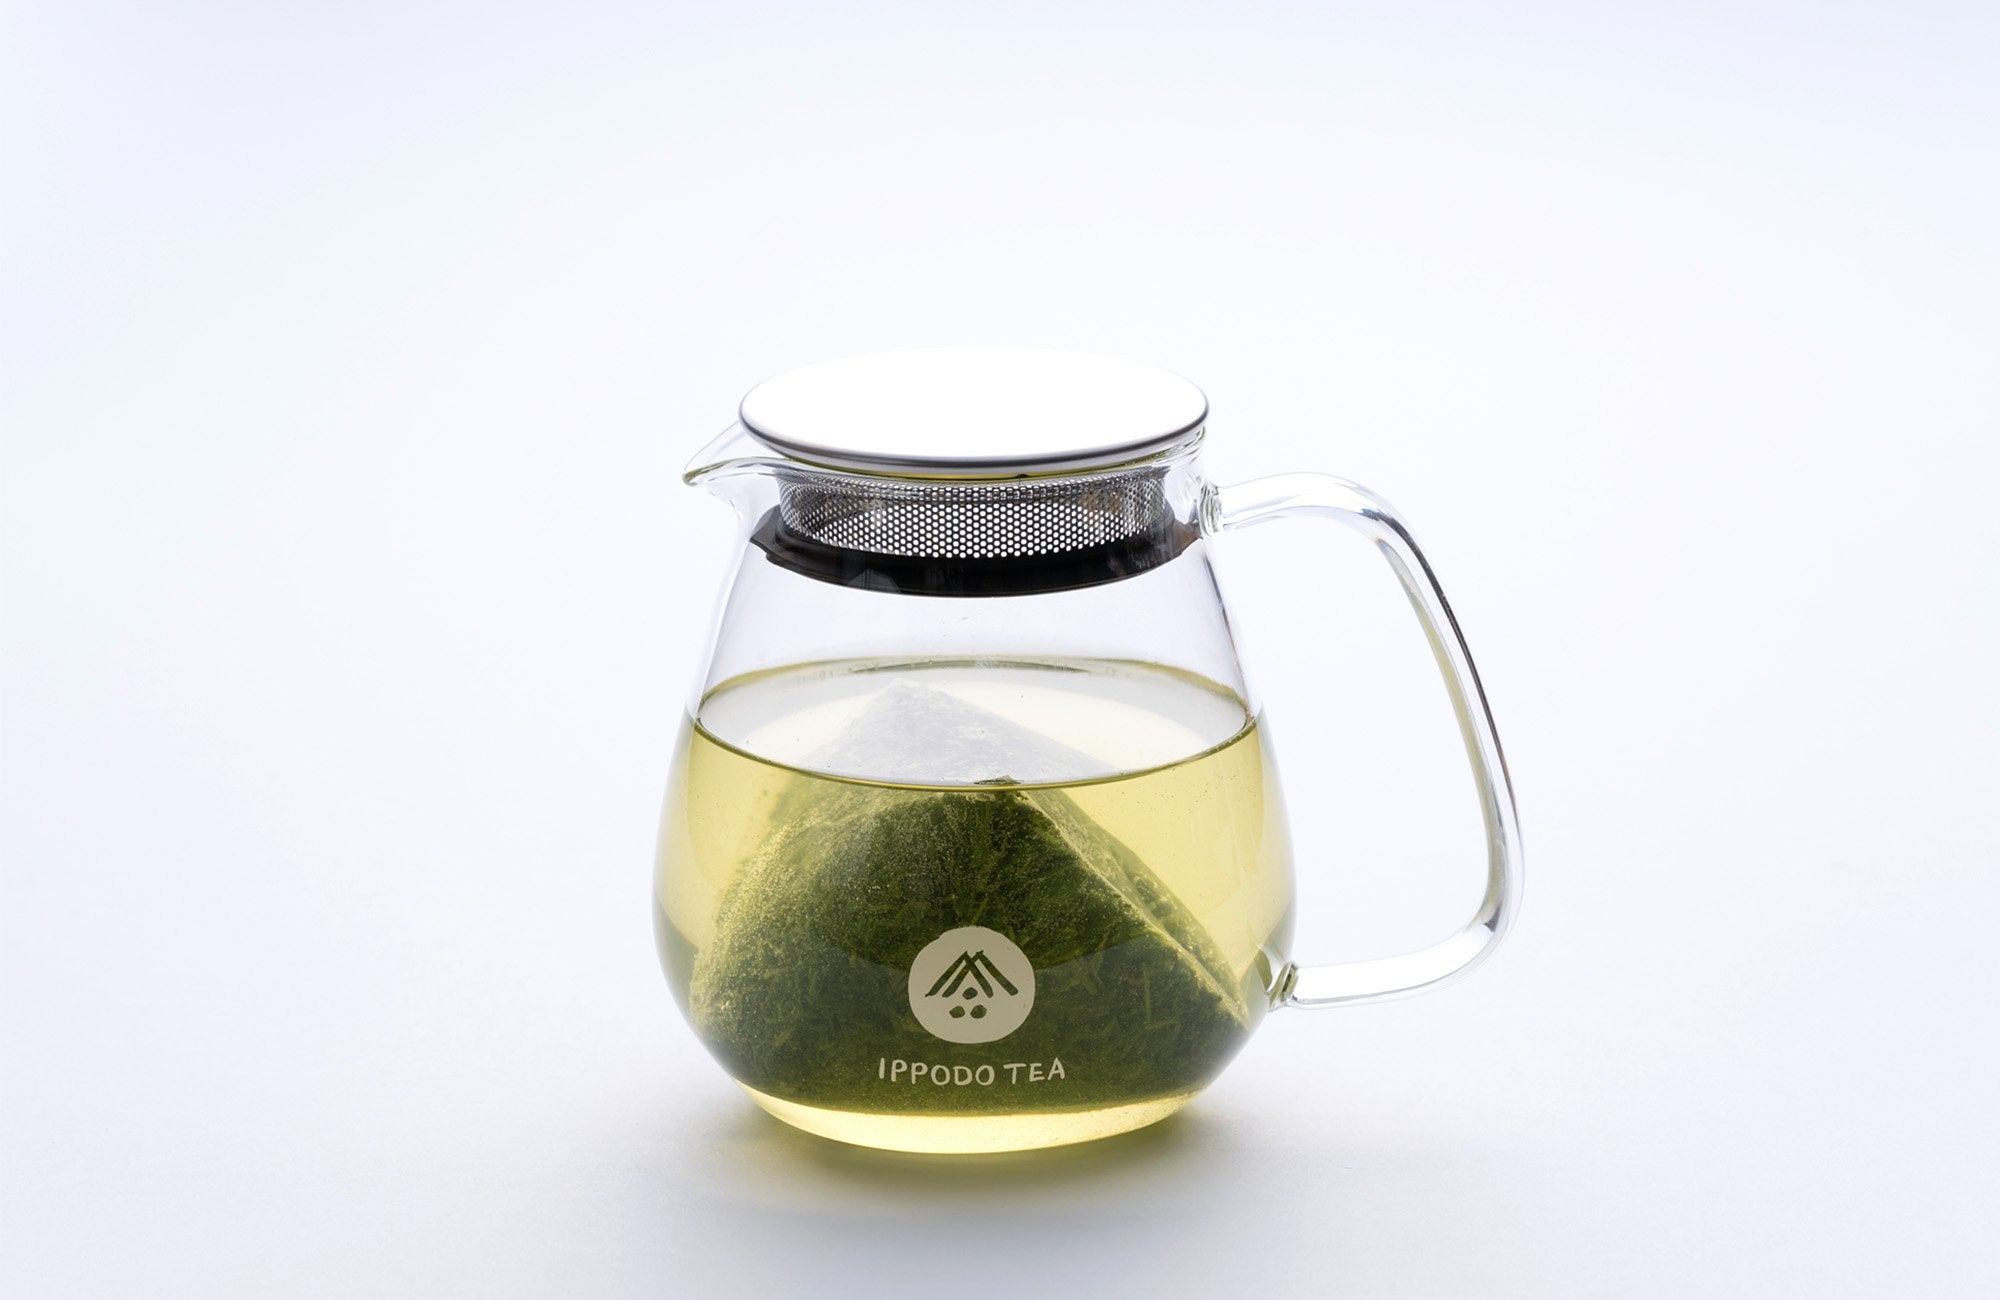 Gyokuro teabag in a glass teapot steeping in hot water.